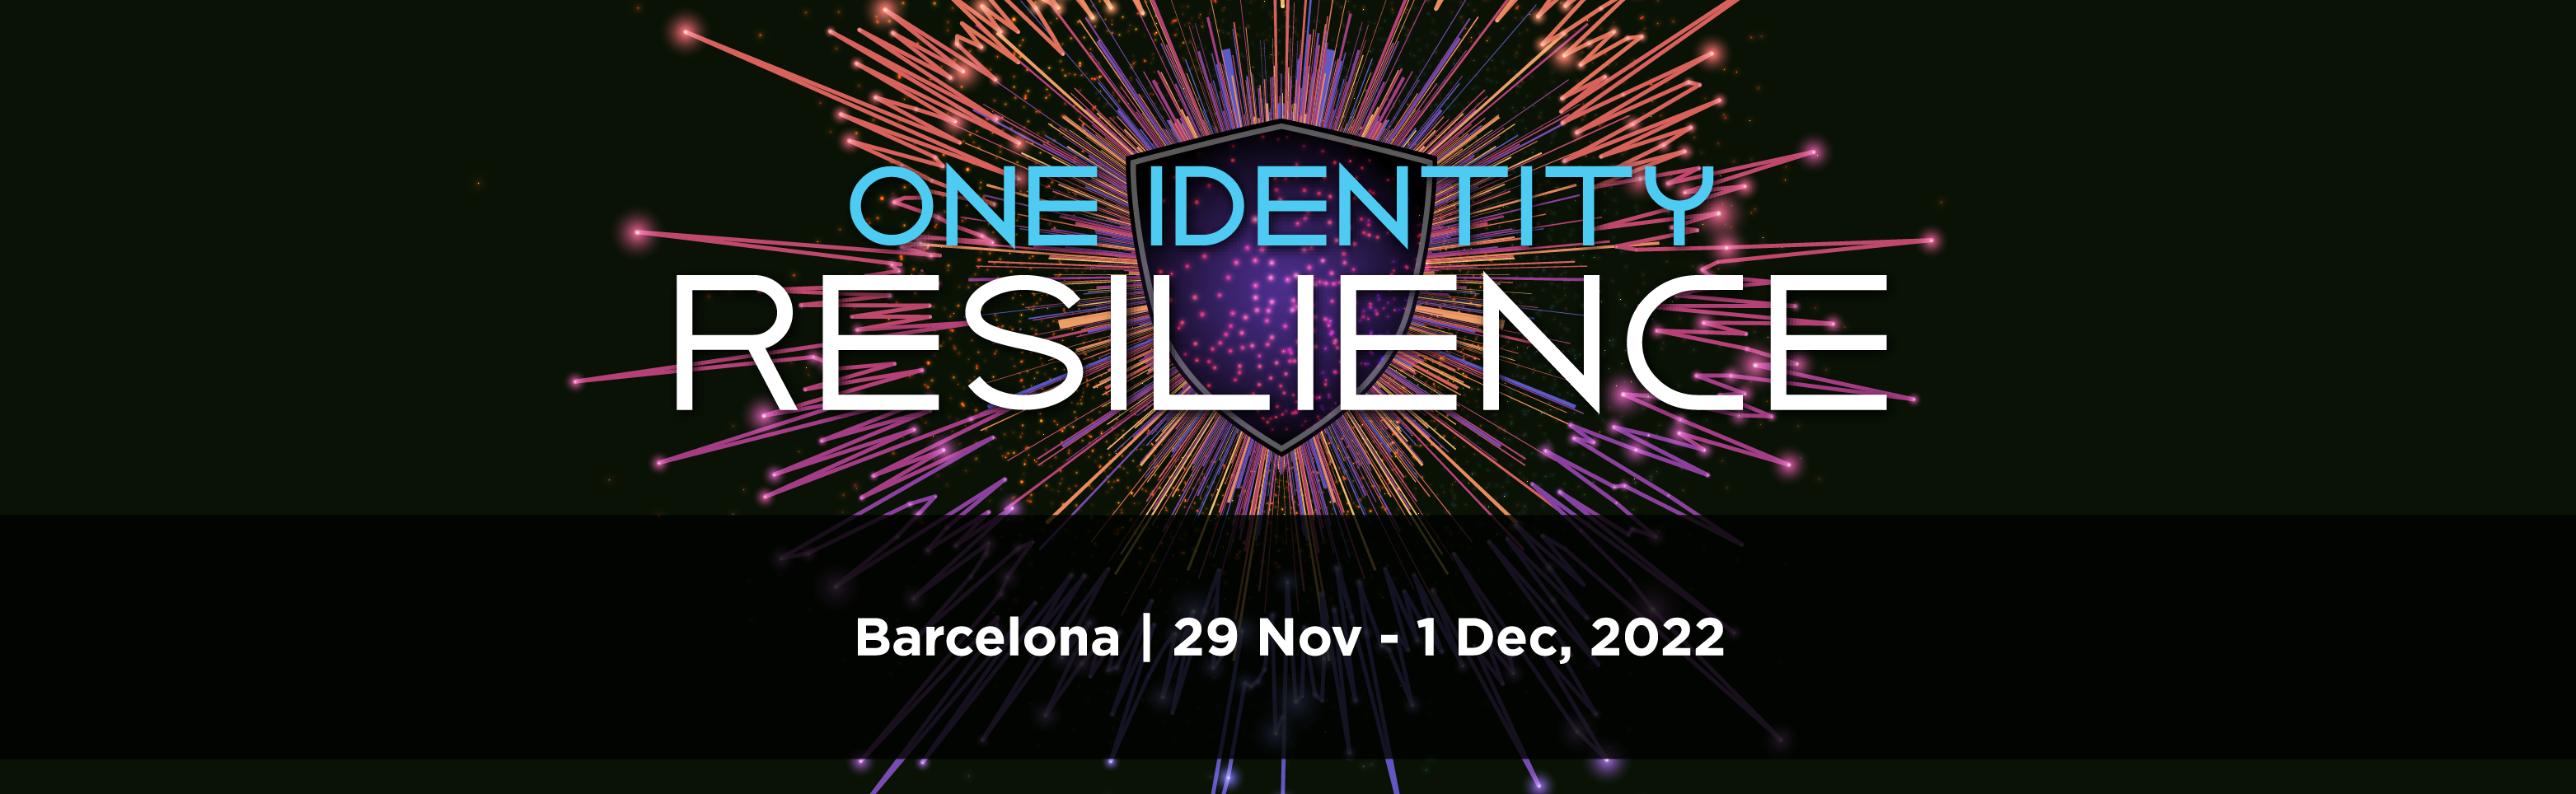 One Identity Resilience 2022 | Barcelona 